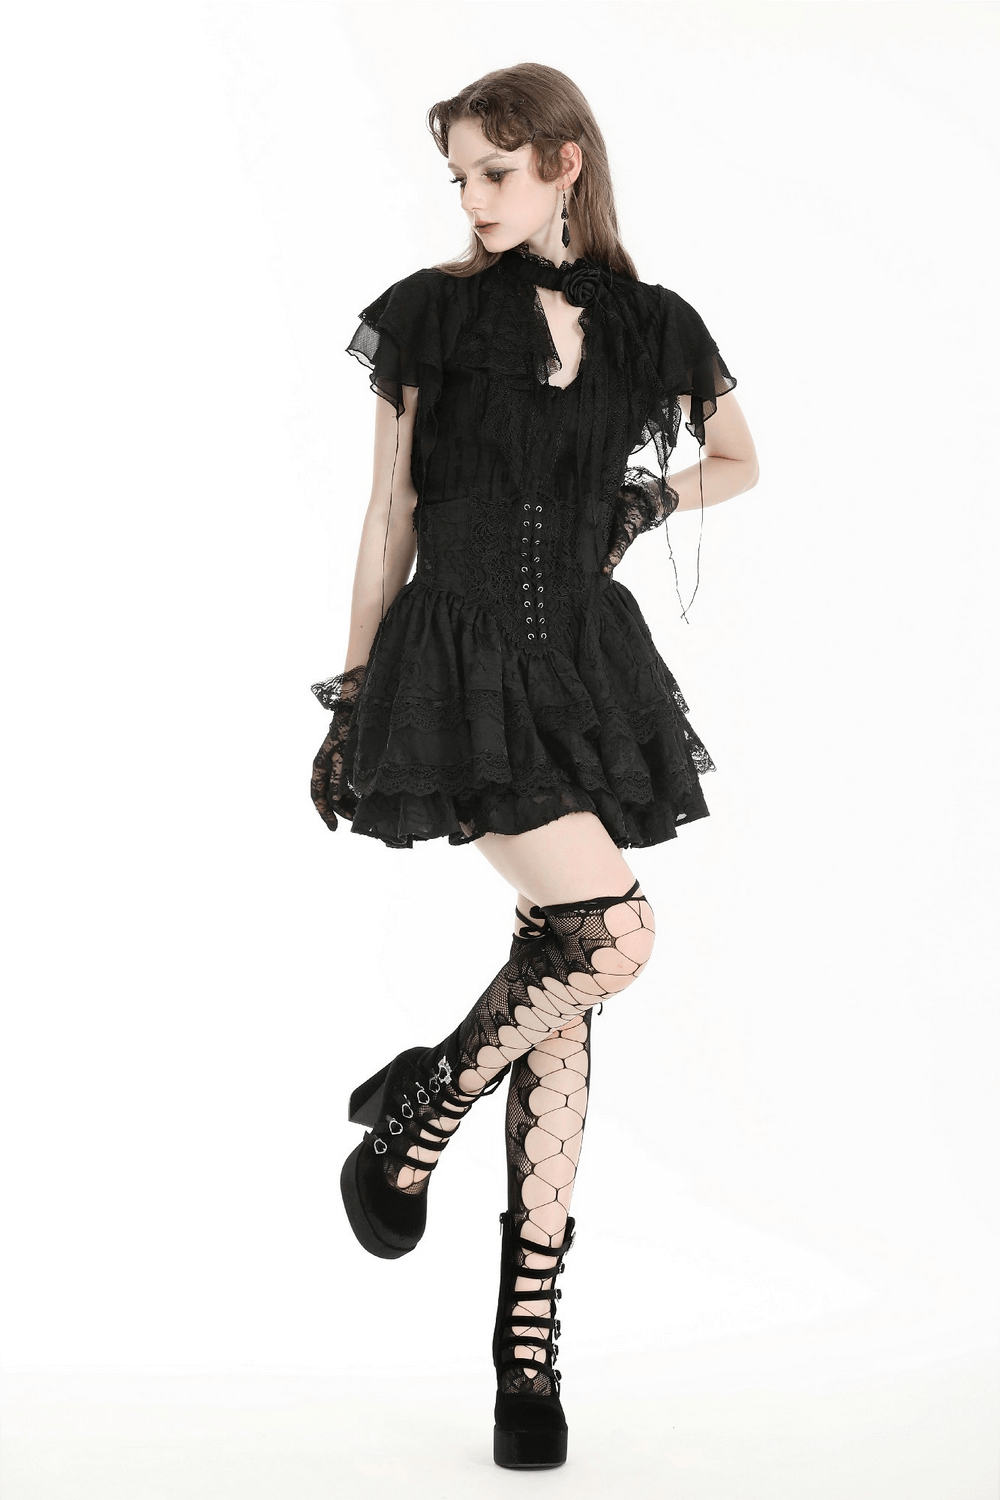 Lace Trim Gothic Layered Skirt with Buckle Detail